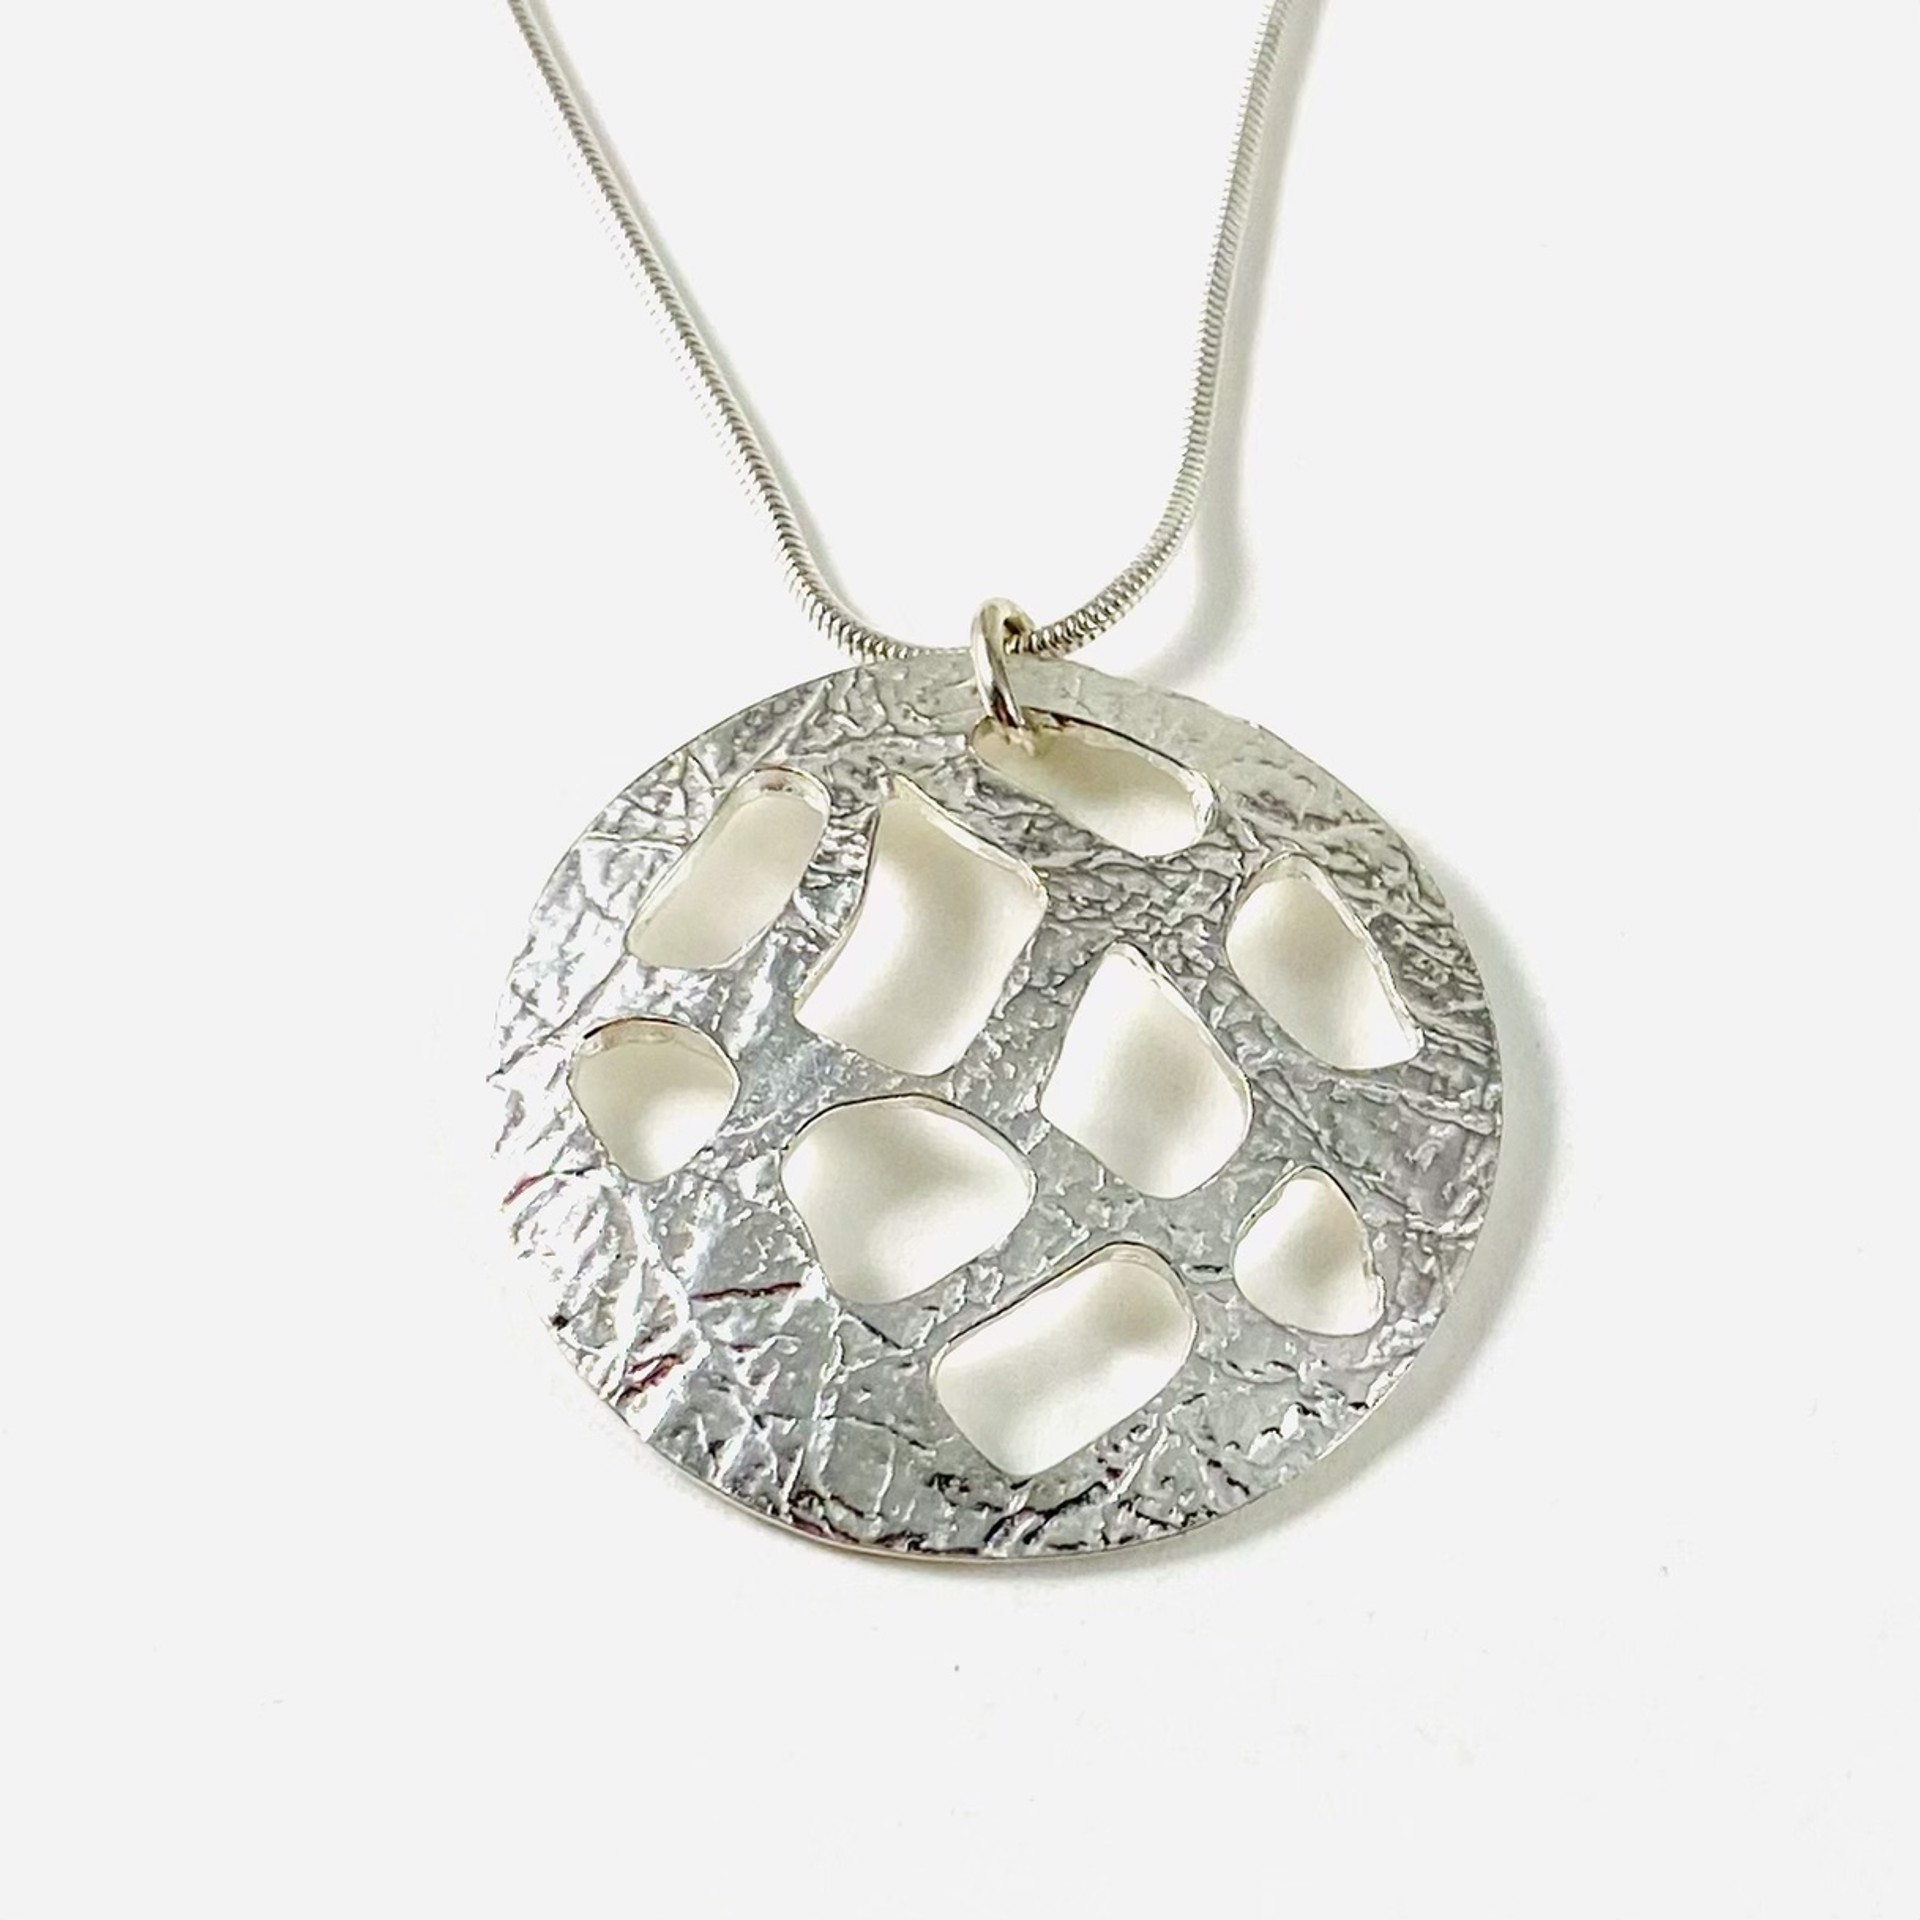 KH21-40 Circle with Cutouts Pendant 18" Sterling Snake Chain by Karen Hakim